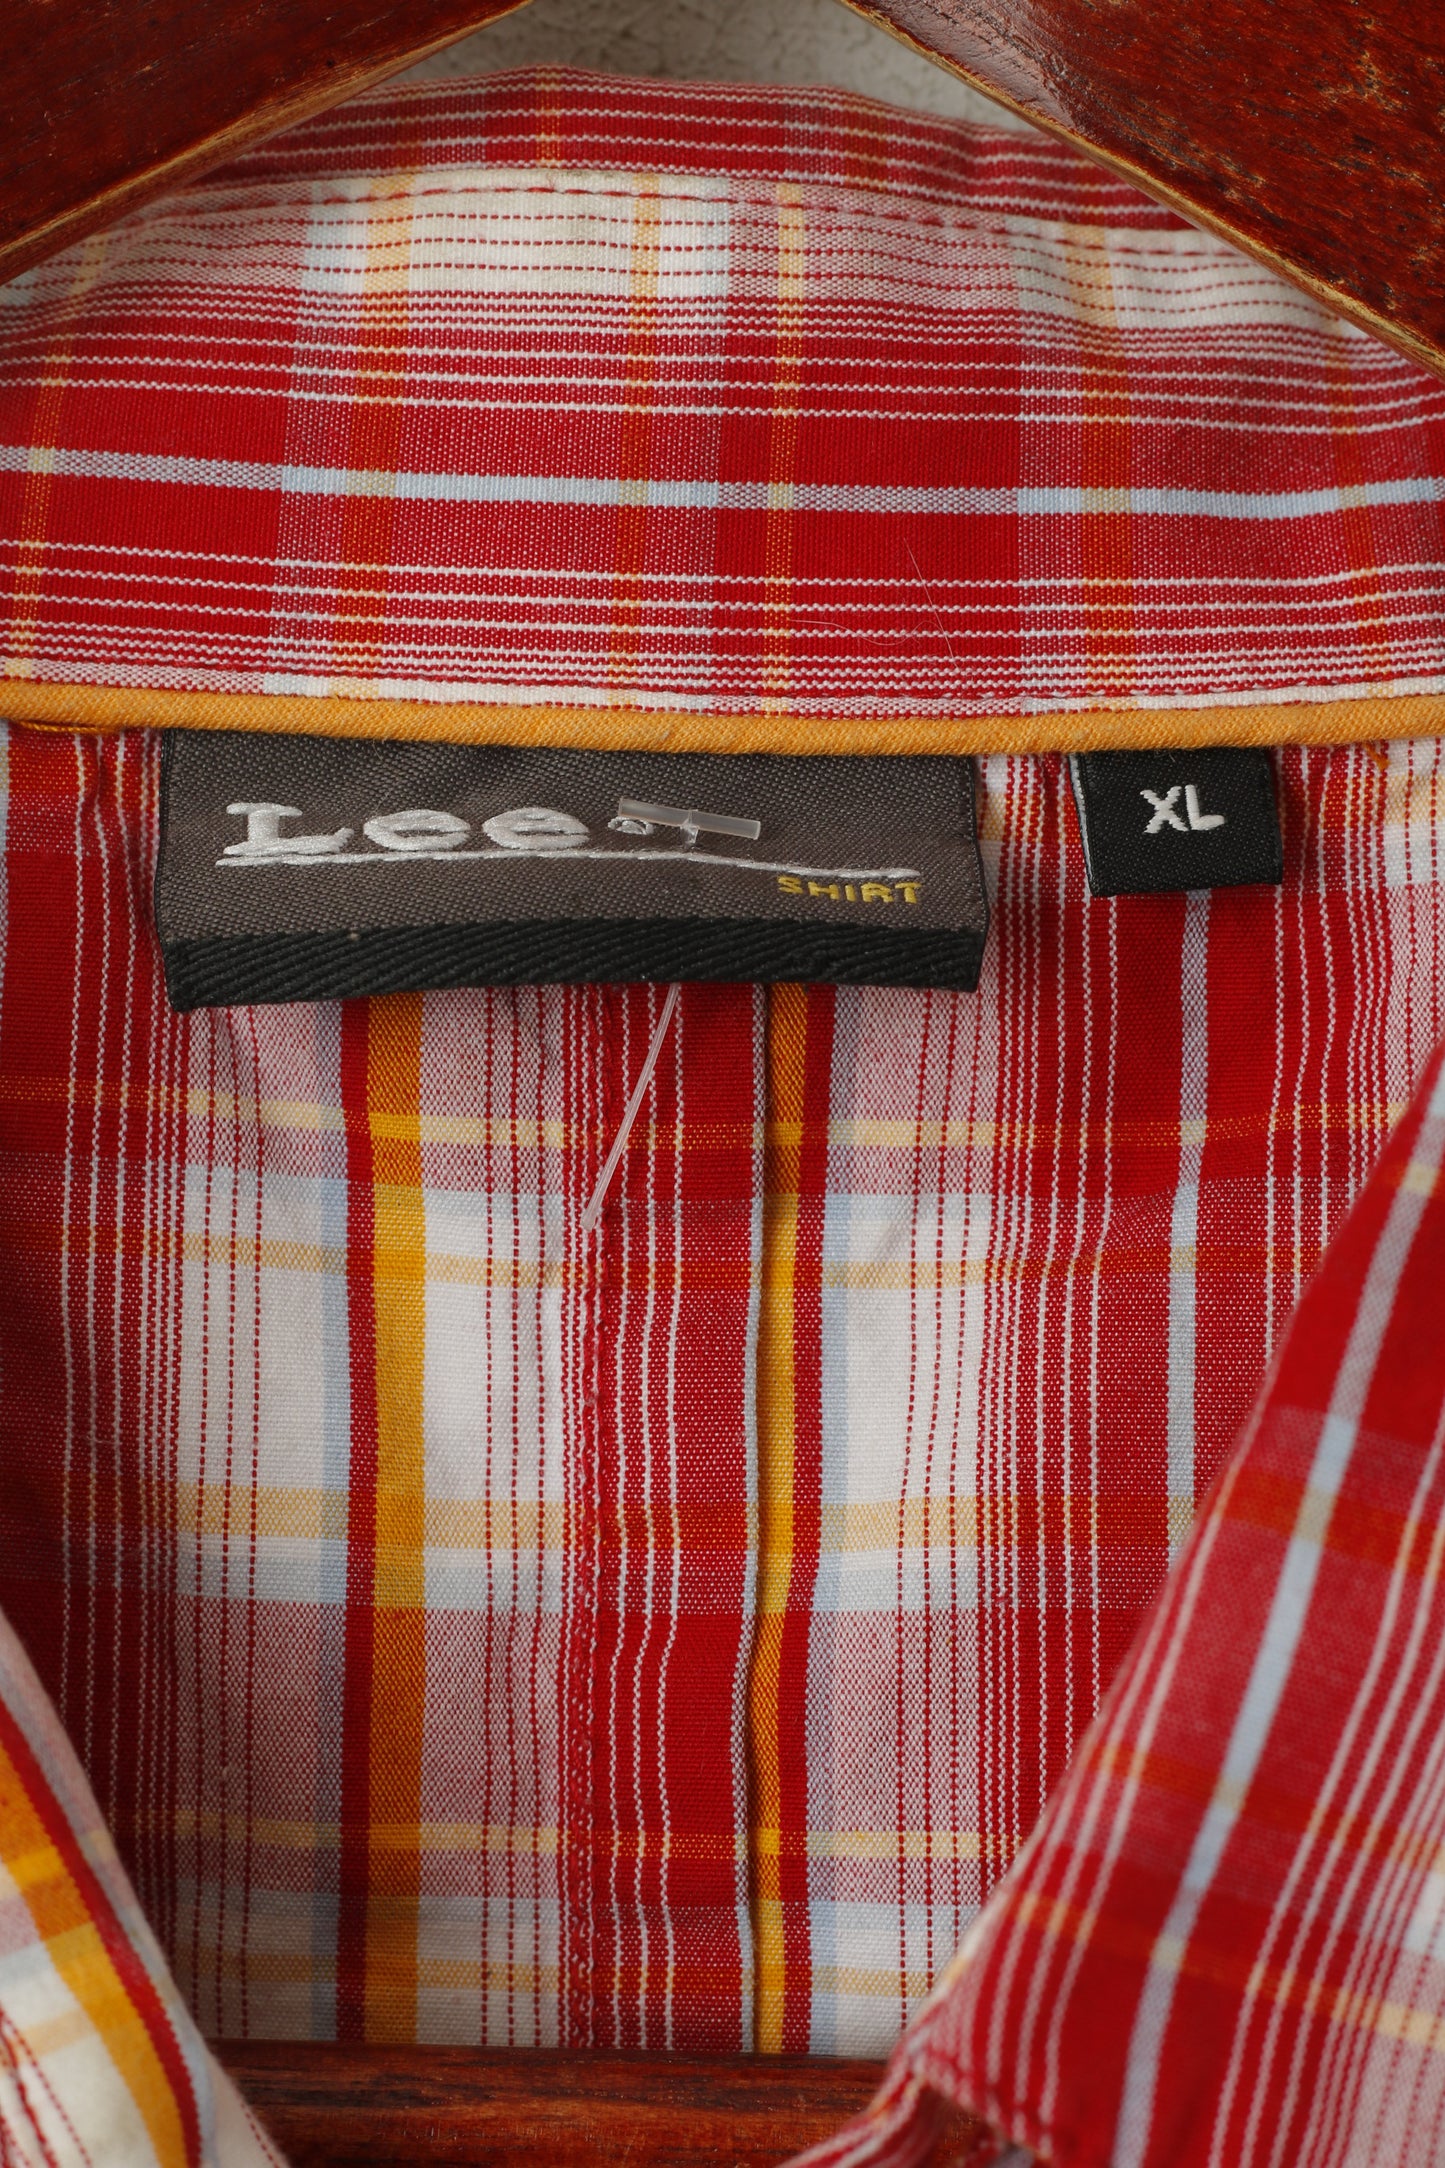 Lee Men XL Casual Shirt Red Cotton Check Popper Buttons Long Sleeve Bull Top